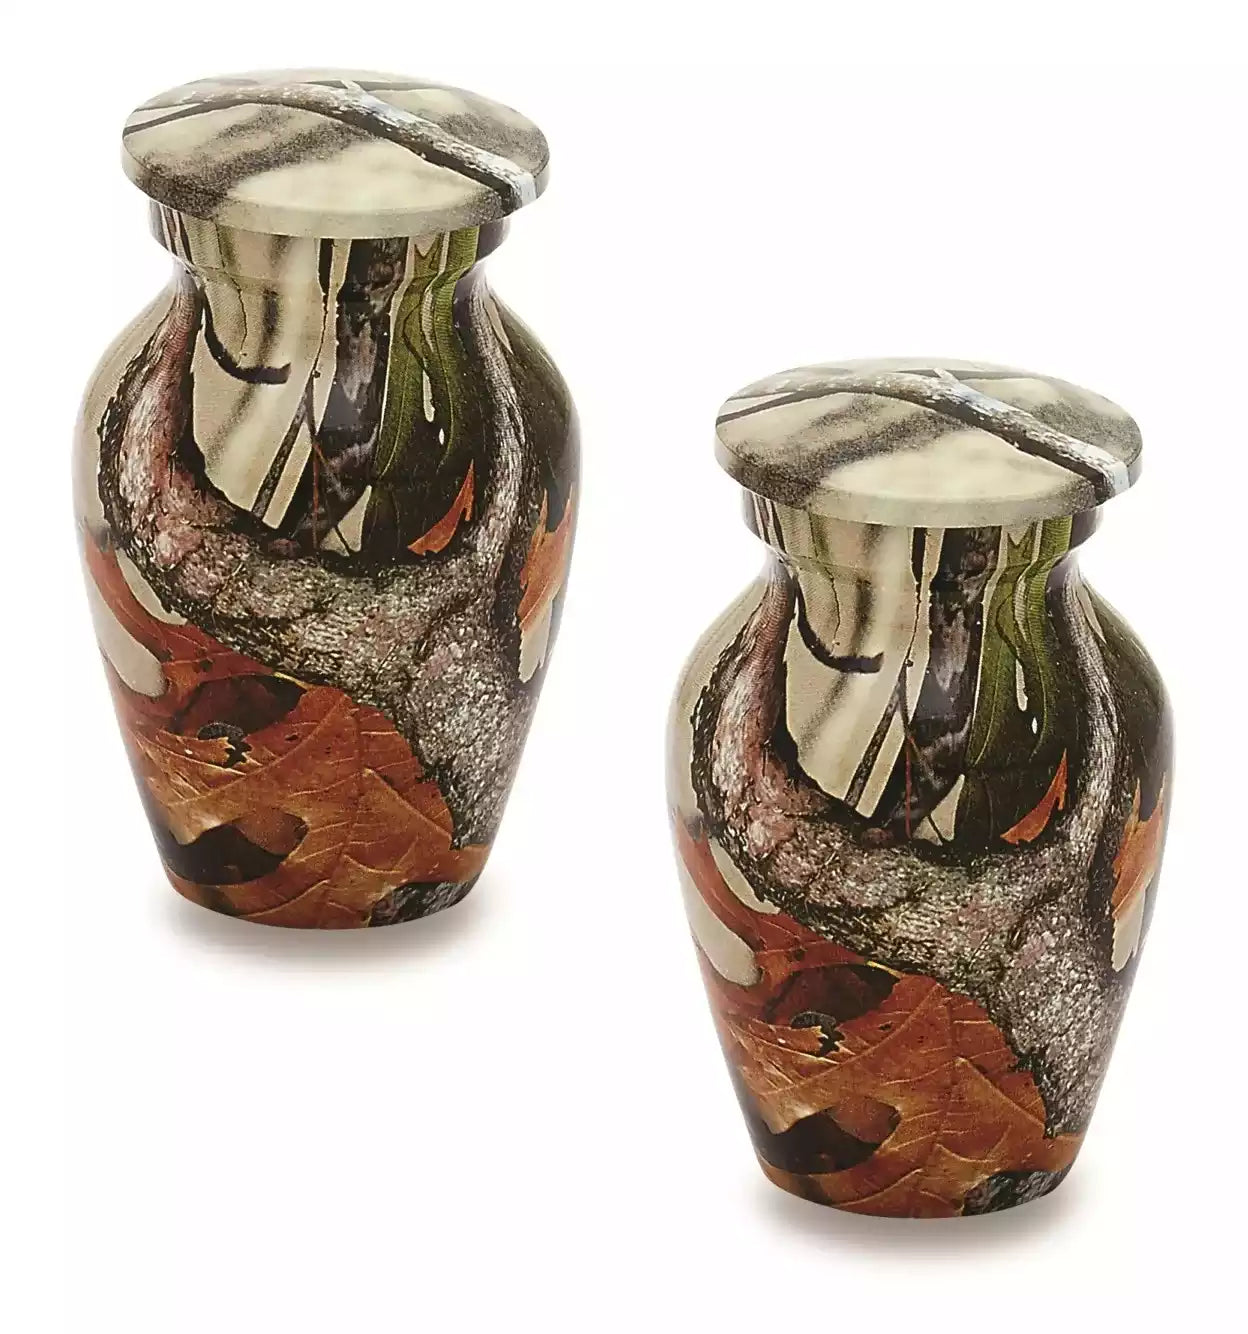 Pet Cremation Urns for Custom Ashes Artwork: Creating Unique and Meaningful Pieces